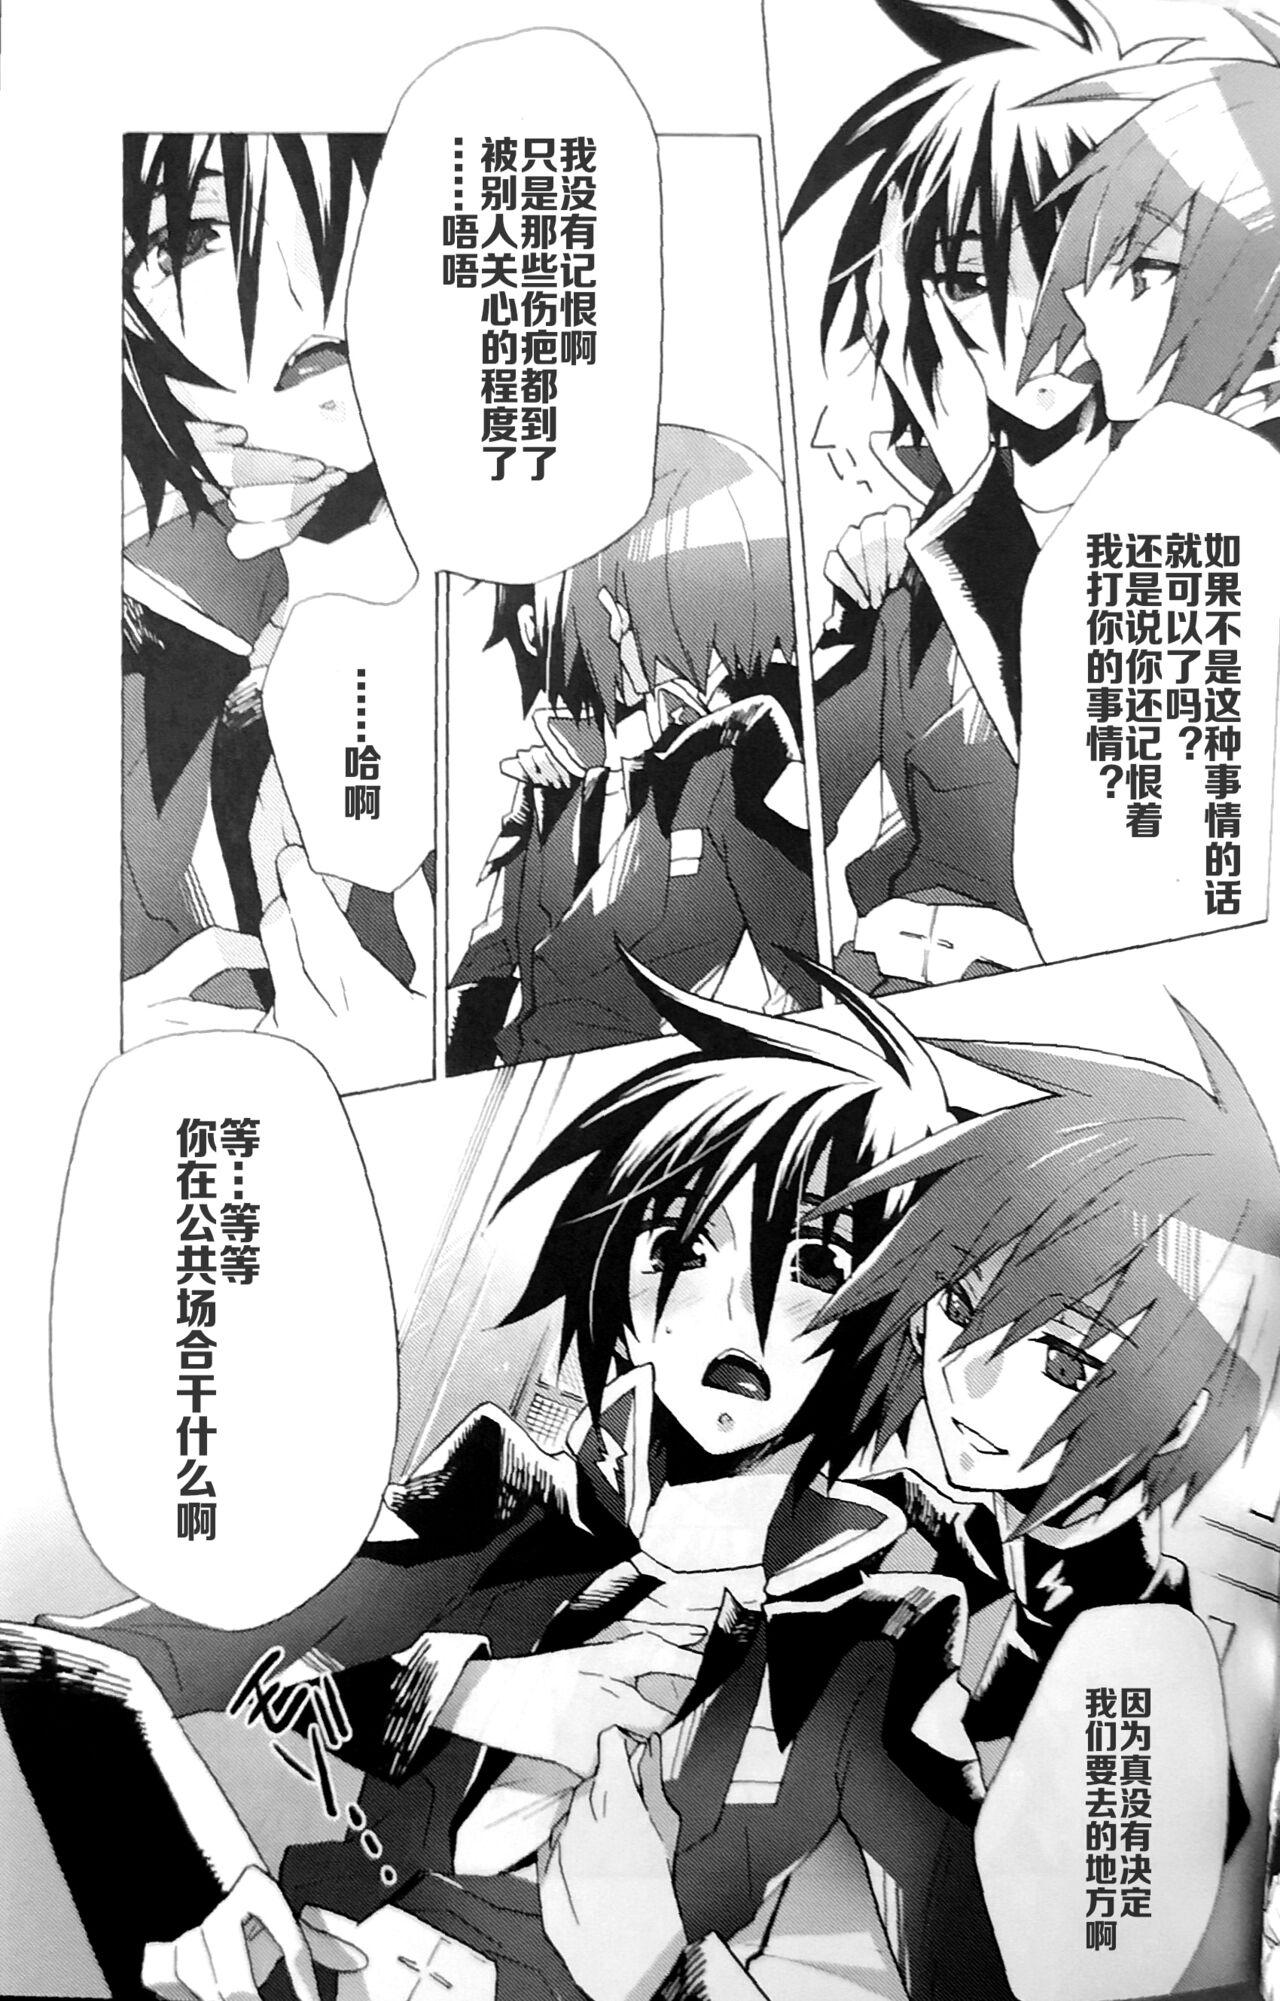 Suckingdick Right and Wrongs - Gundam seed destiny Gay Shorthair - Page 8